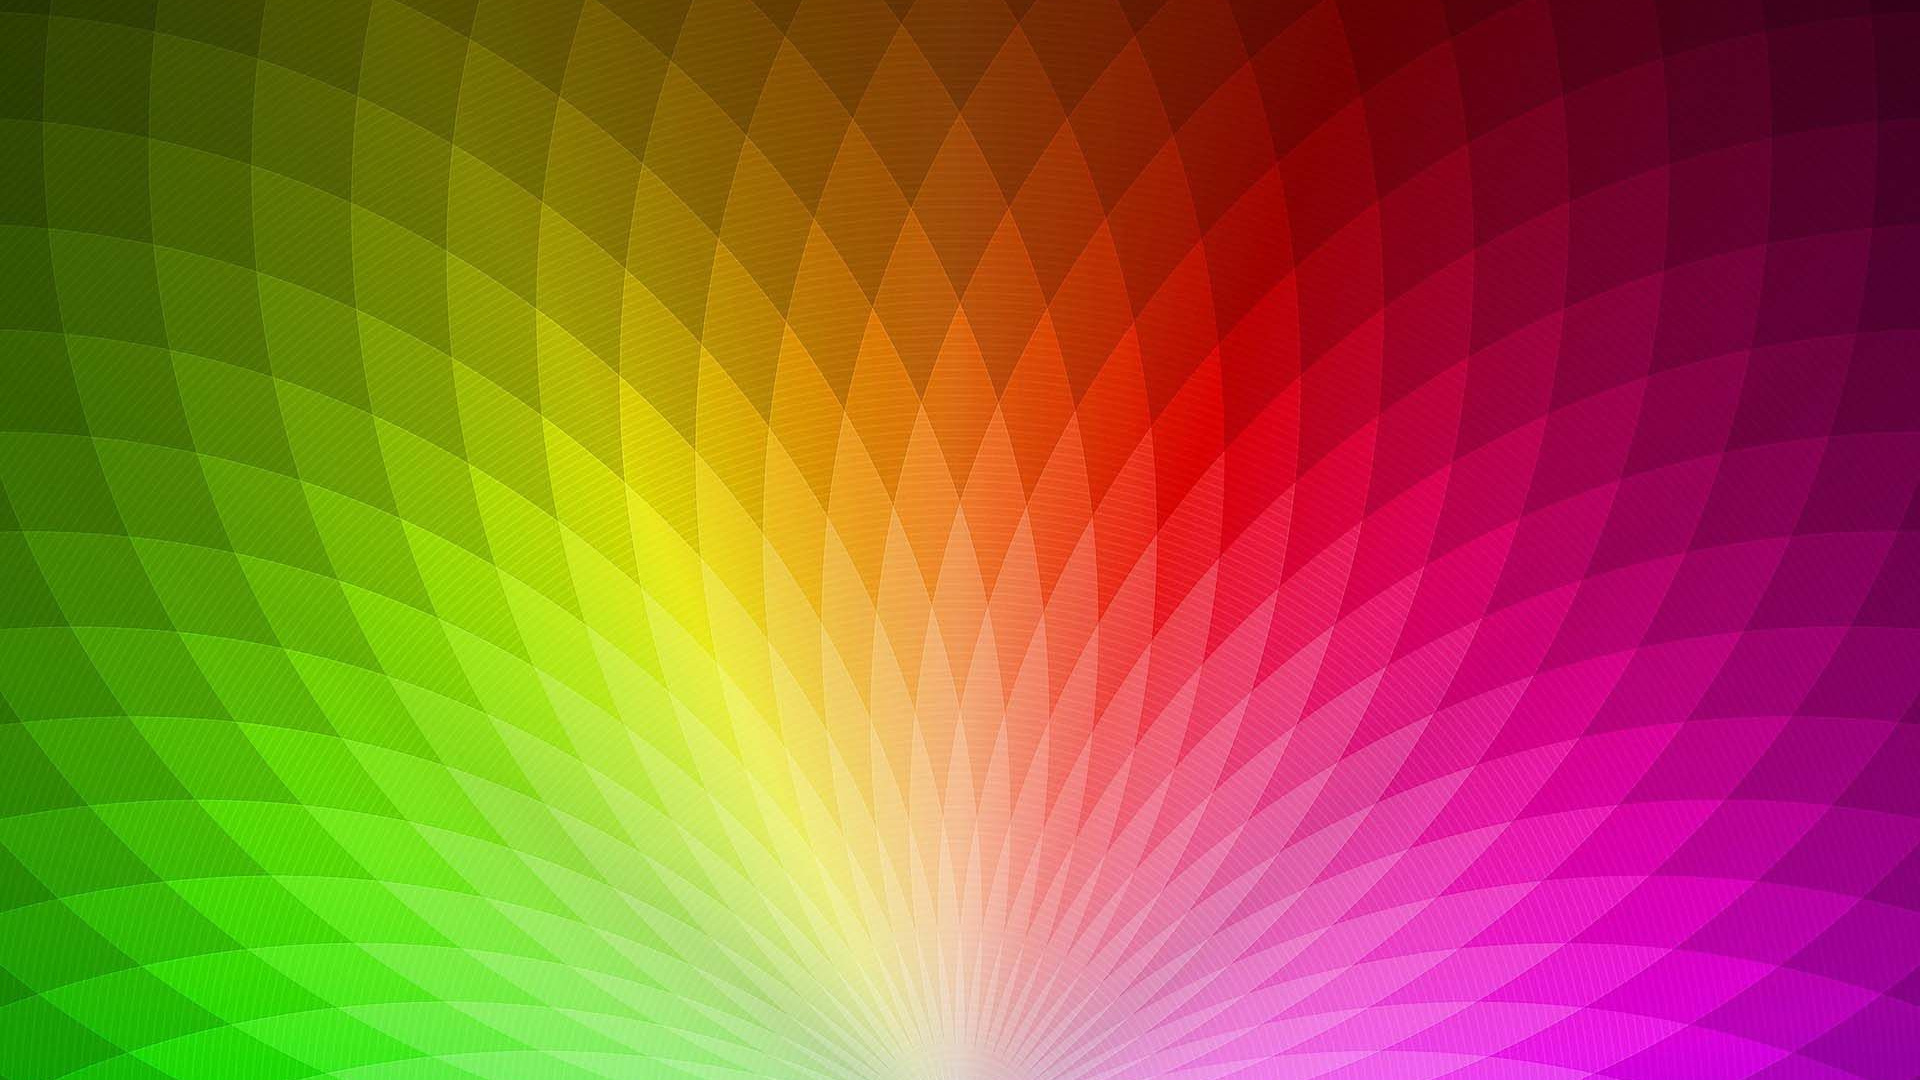 Rainbow pattern wallpaper, HD quality, 3D and abstract, Mesmerizing and captivating, 1920x1080 Full HD Desktop